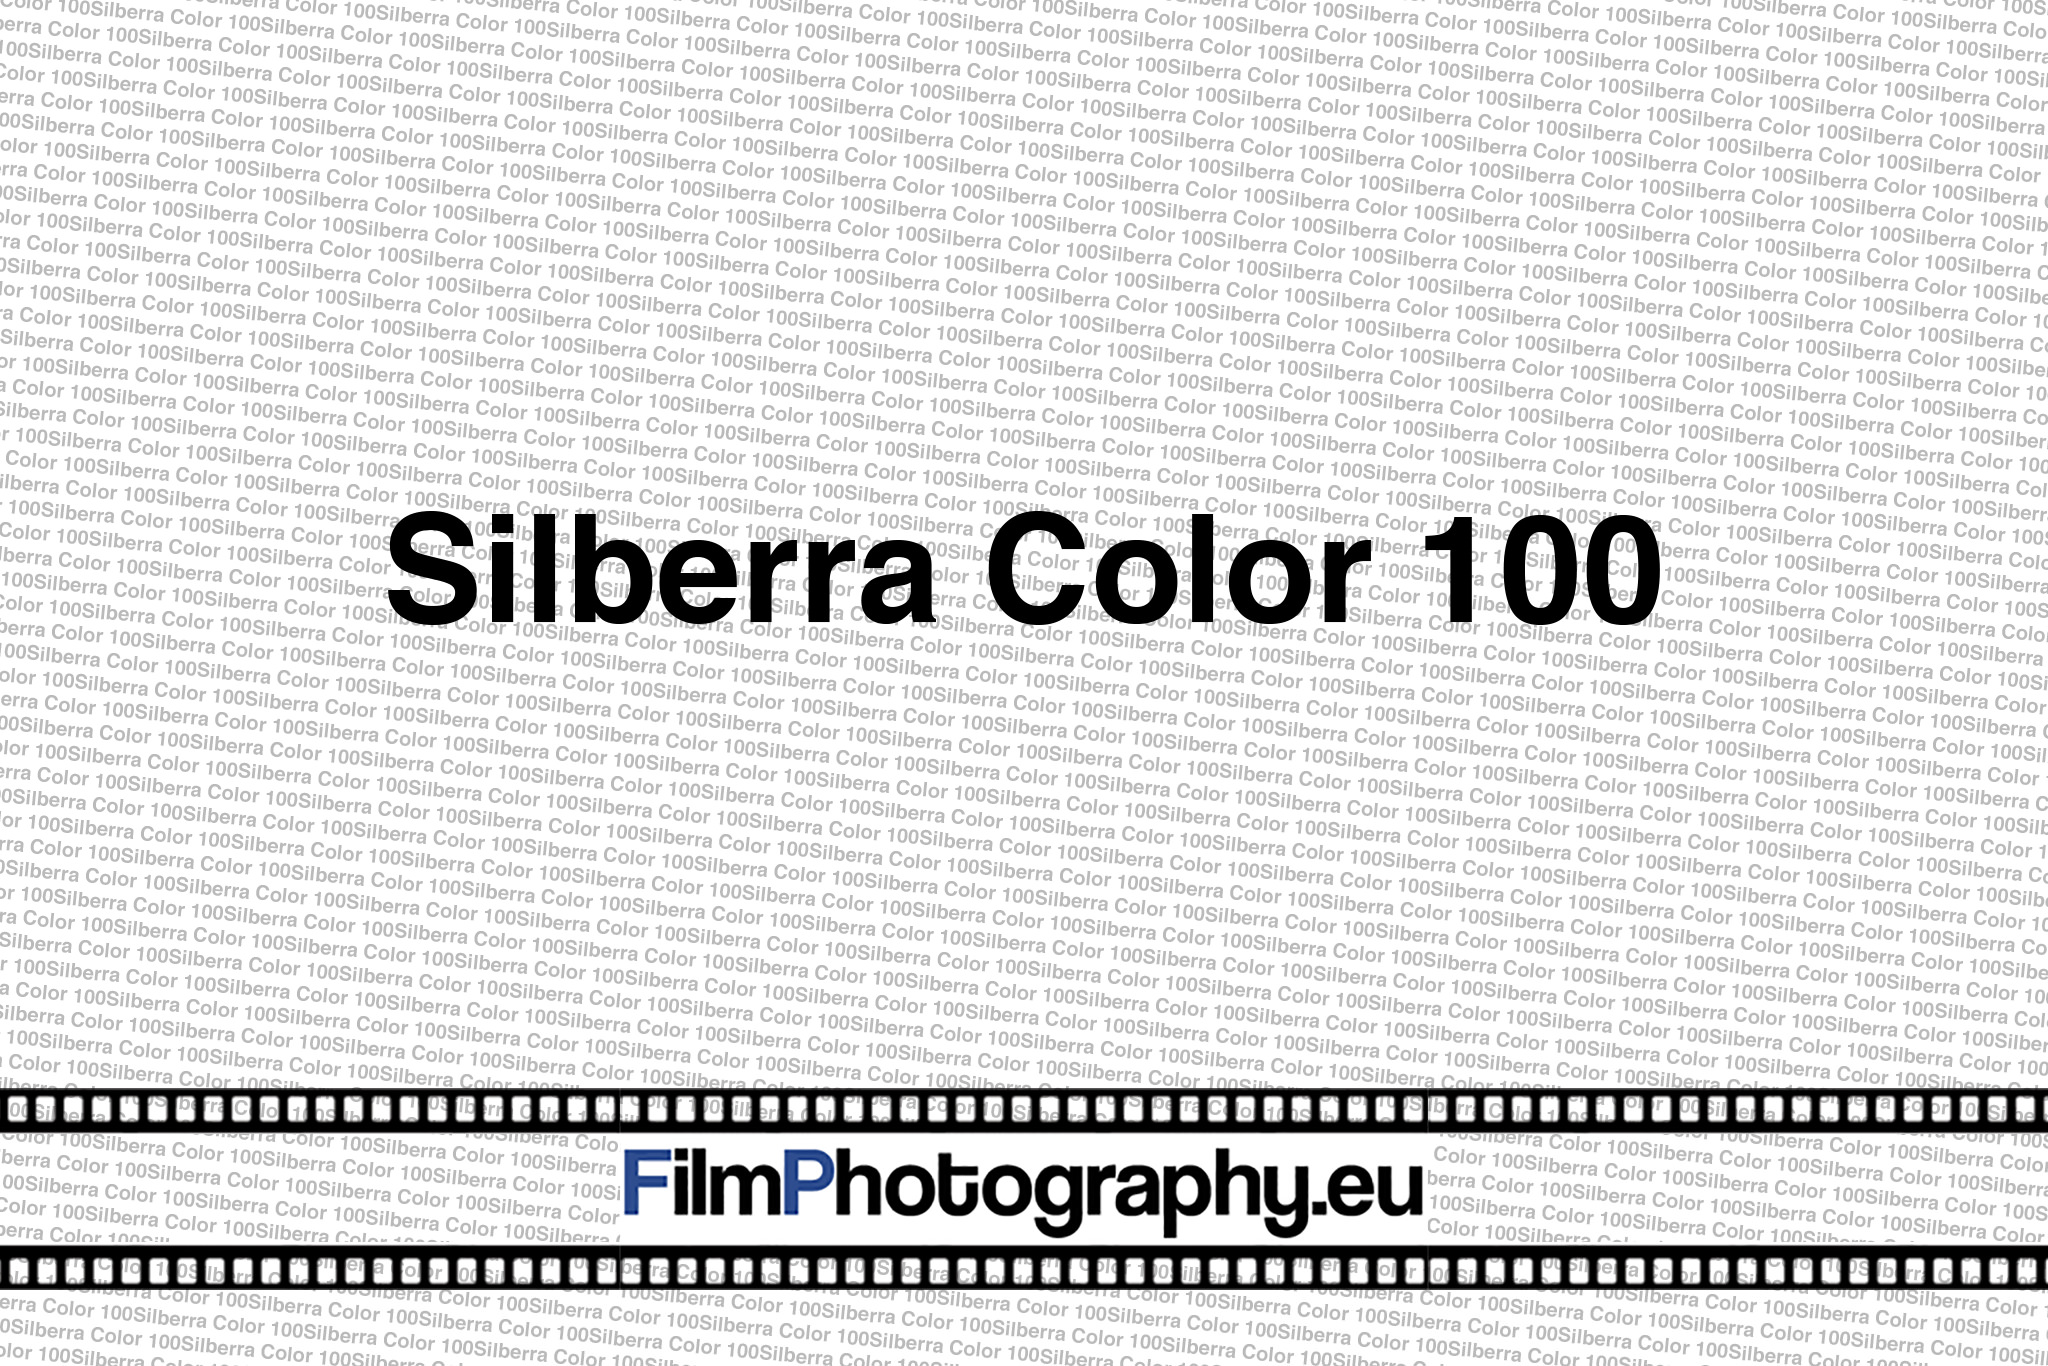 Silberra Color 100 - Guide to the colour film of the Russian supplier